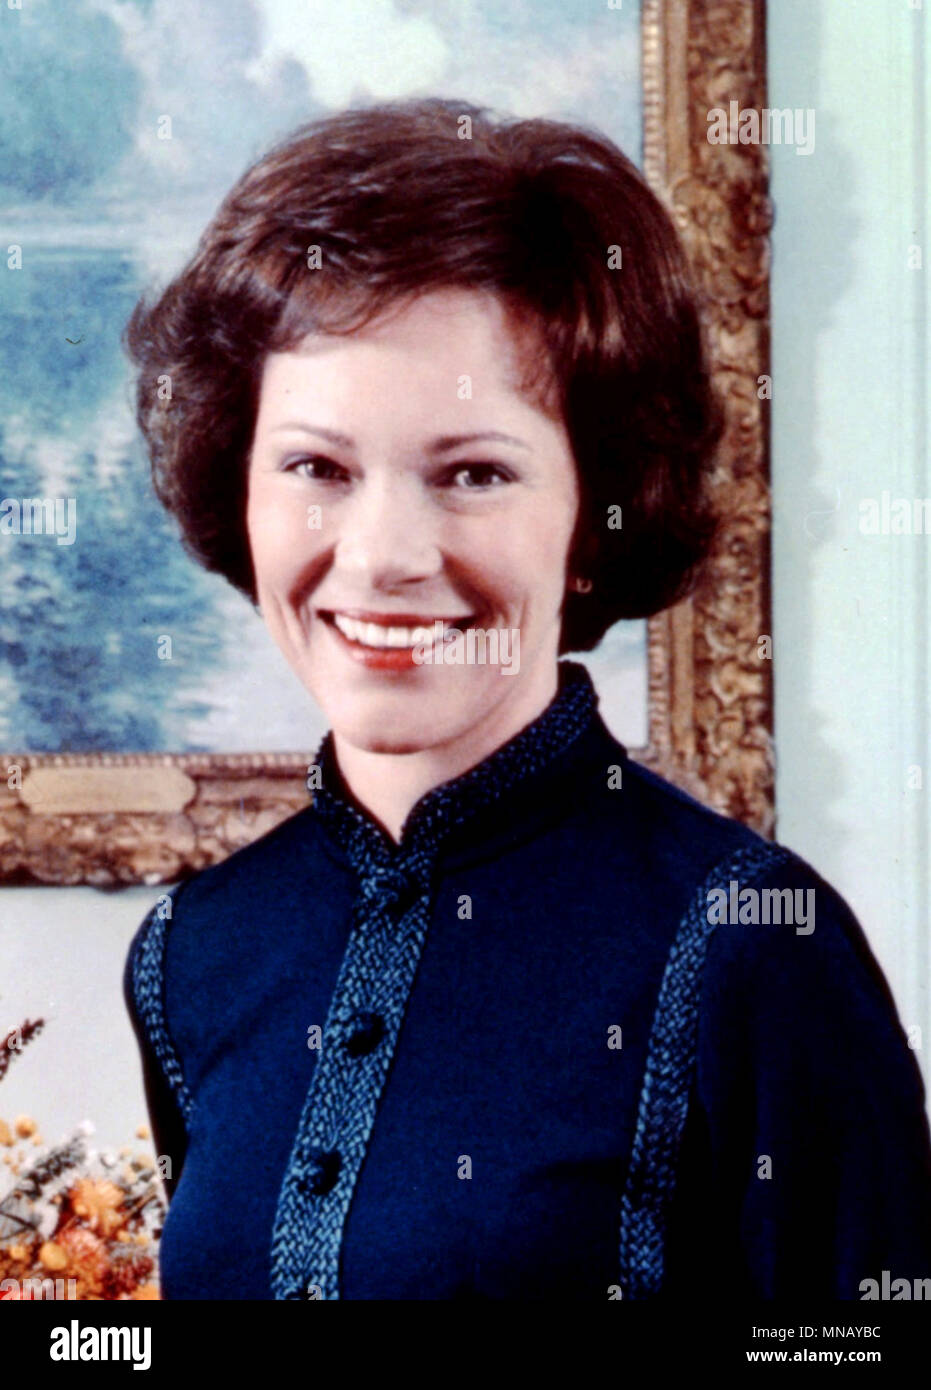 Rose Carter, Eleanor Rosalynn Carter, wife of the 39th President of the United States, Jimmy Carter, and served as the First Lady of the United States from 1977 to 1981 Stock Photo